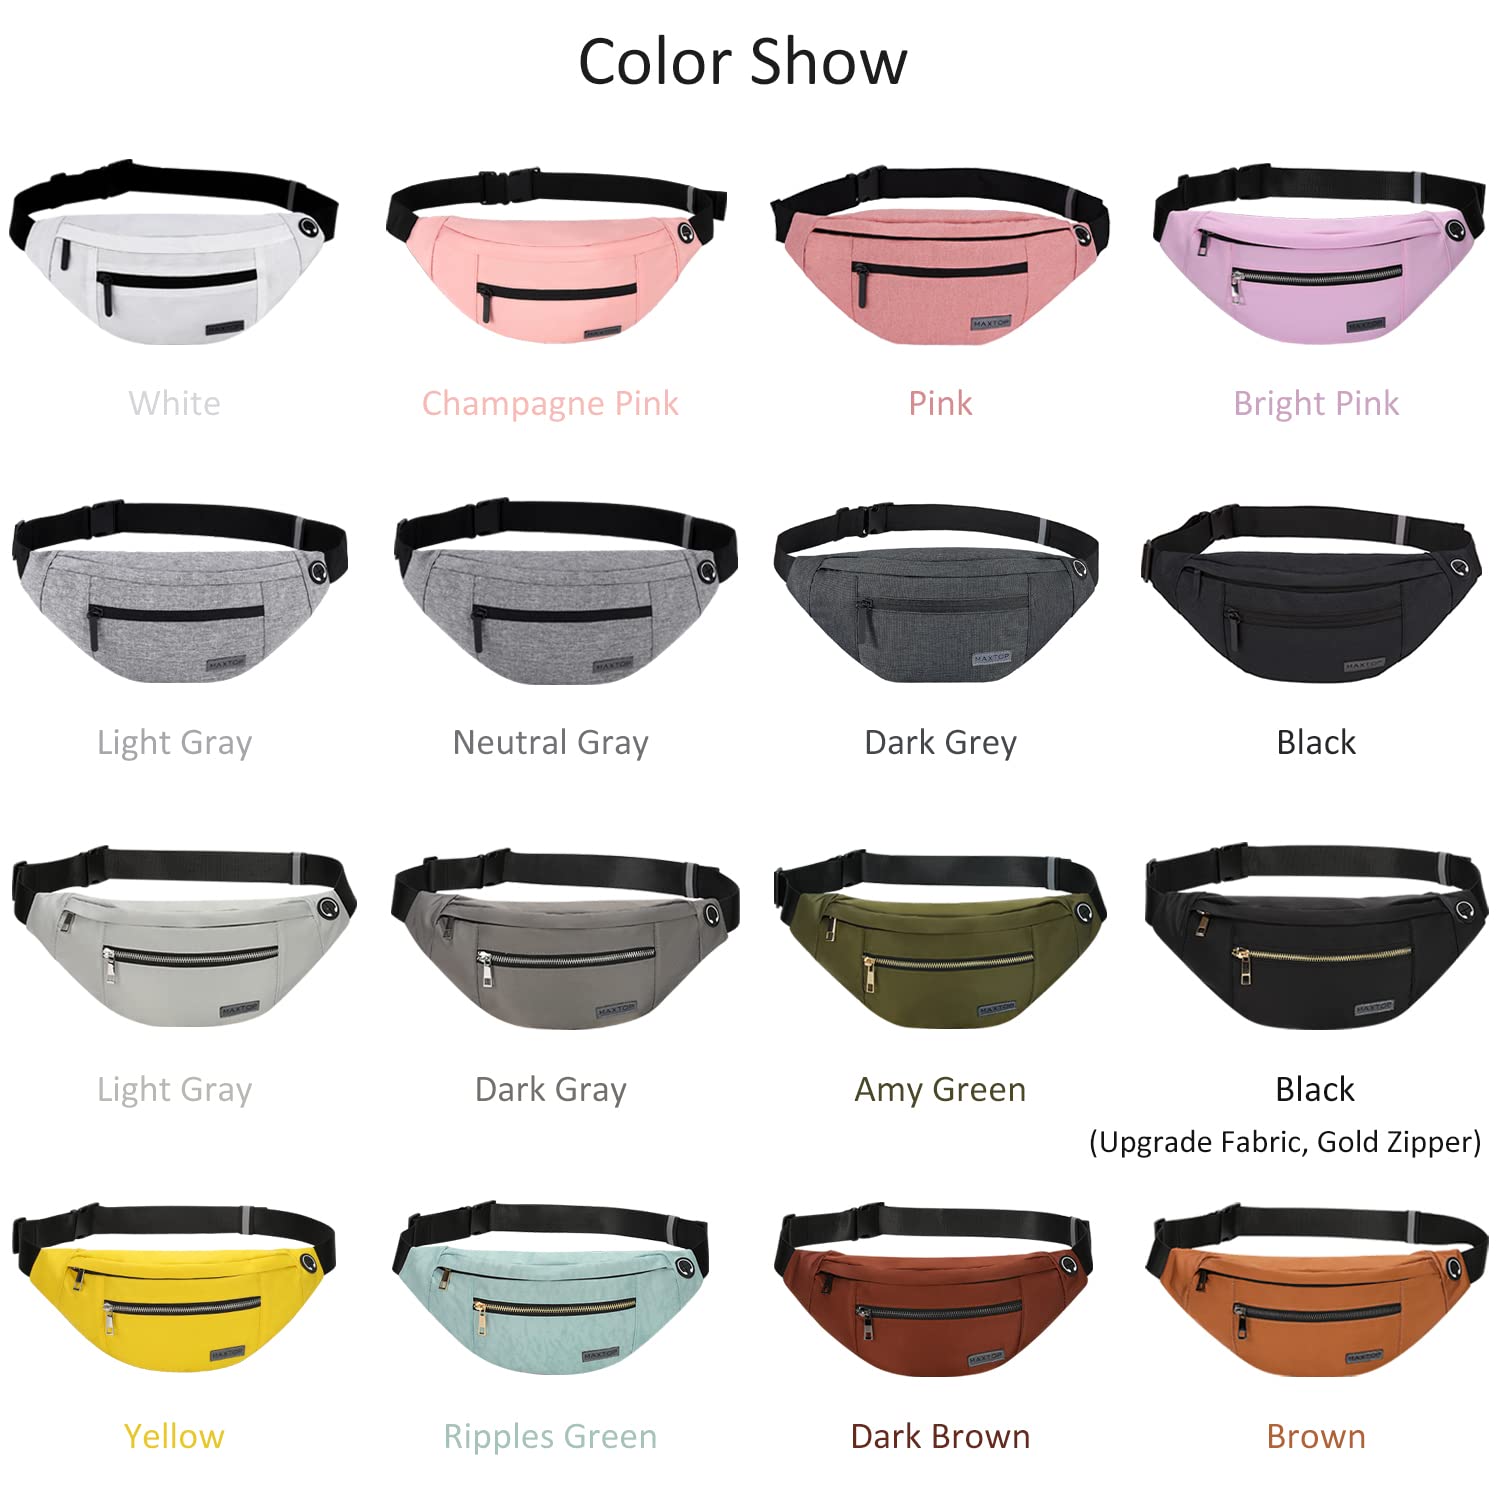 holographic-black-pu-leather--large-fanny-pack-4-zipper-yy--2--274866.jpg